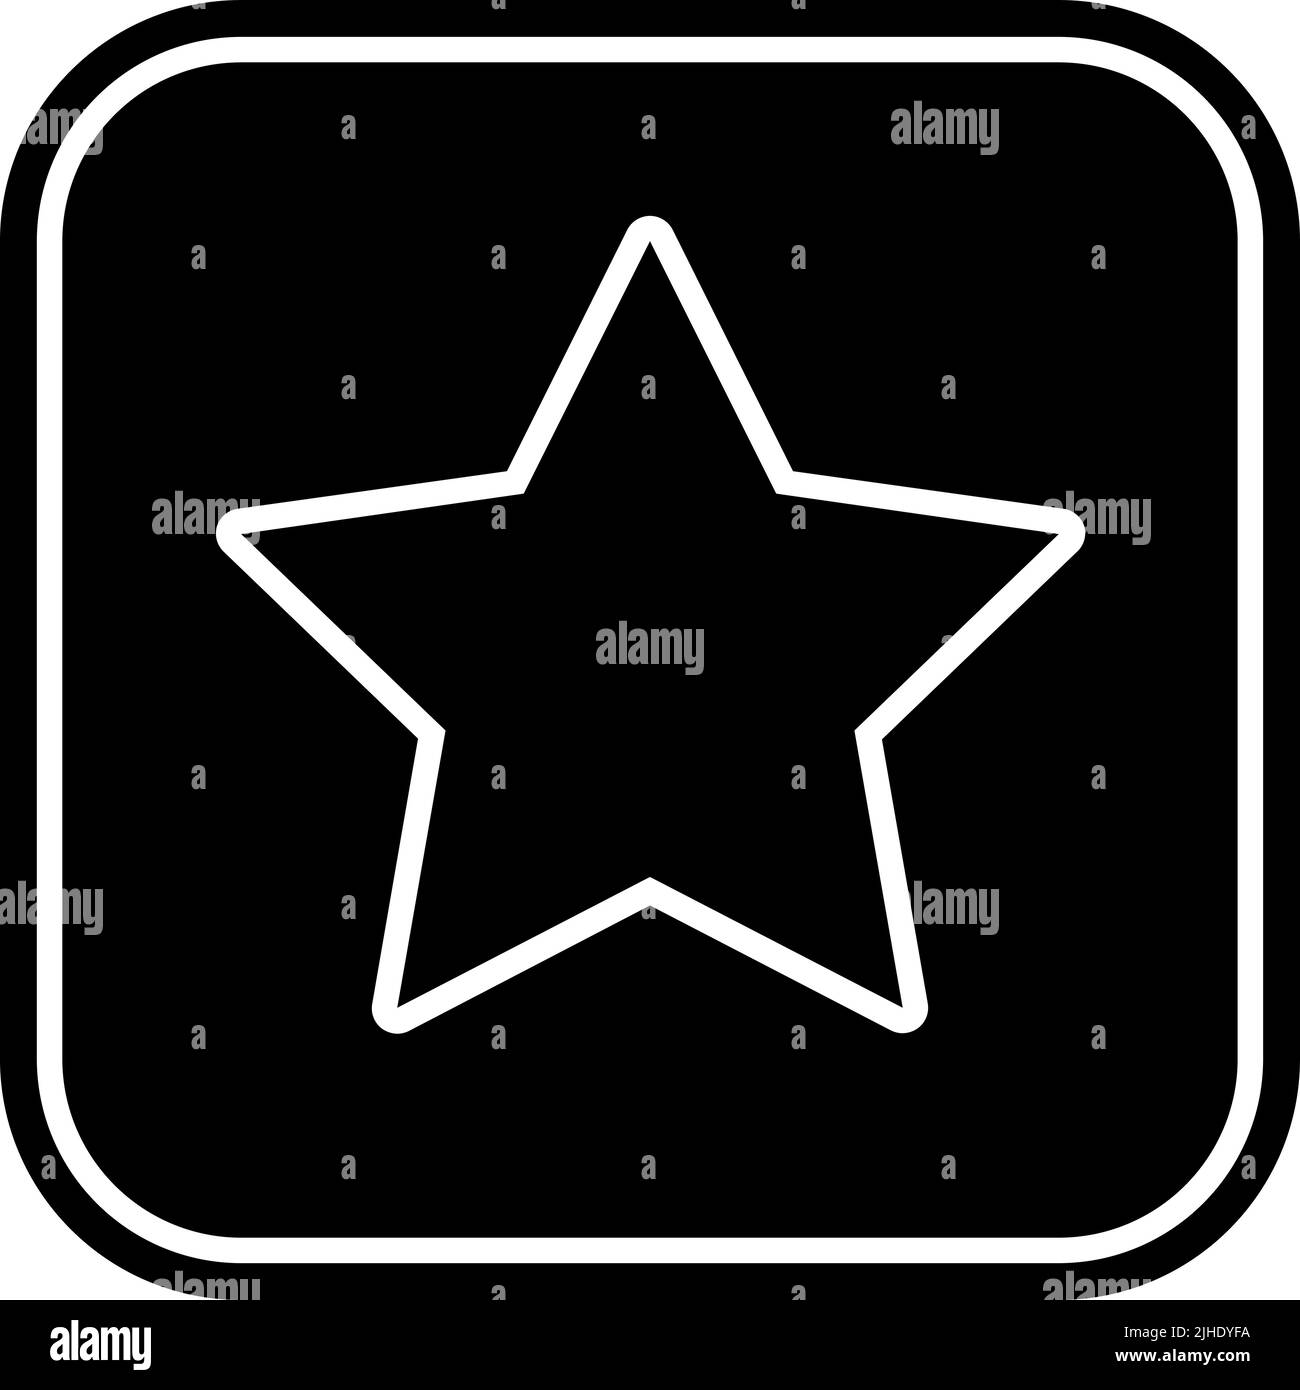 The essentials star . Stock Vector